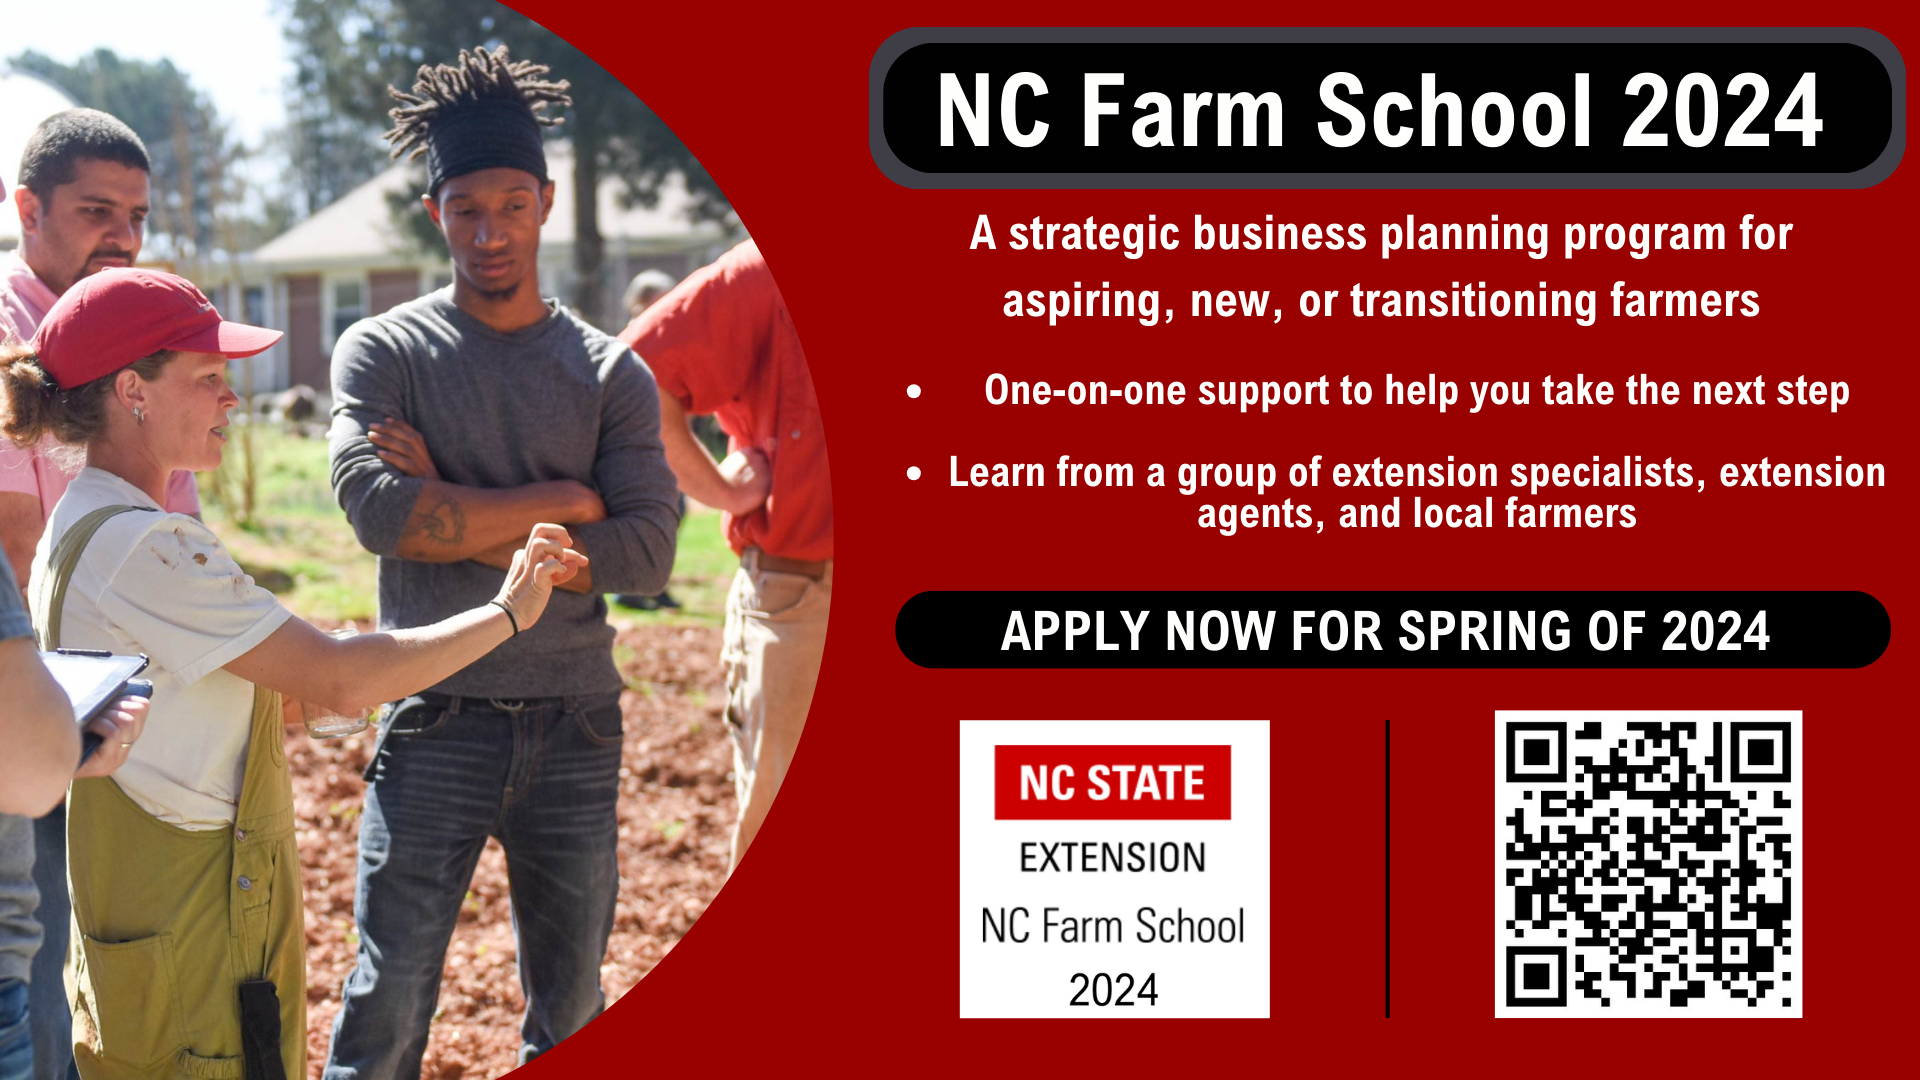 Graphic describing the 2024 NC Farm School program. This immersive program is for aspiring and current farmers to gain business management knowledge and resources to help them start and grow their farms. Composed of 8 sessions focusing on farm business topics (ex. marketing, record keeping, enterprise selection, taxes, etc.) along with 6 day-long field days to see successful farms in action, this program aims to help participants create a solid business plan for their farm operation and foundational knowledge to create and sustain their farm businesses.